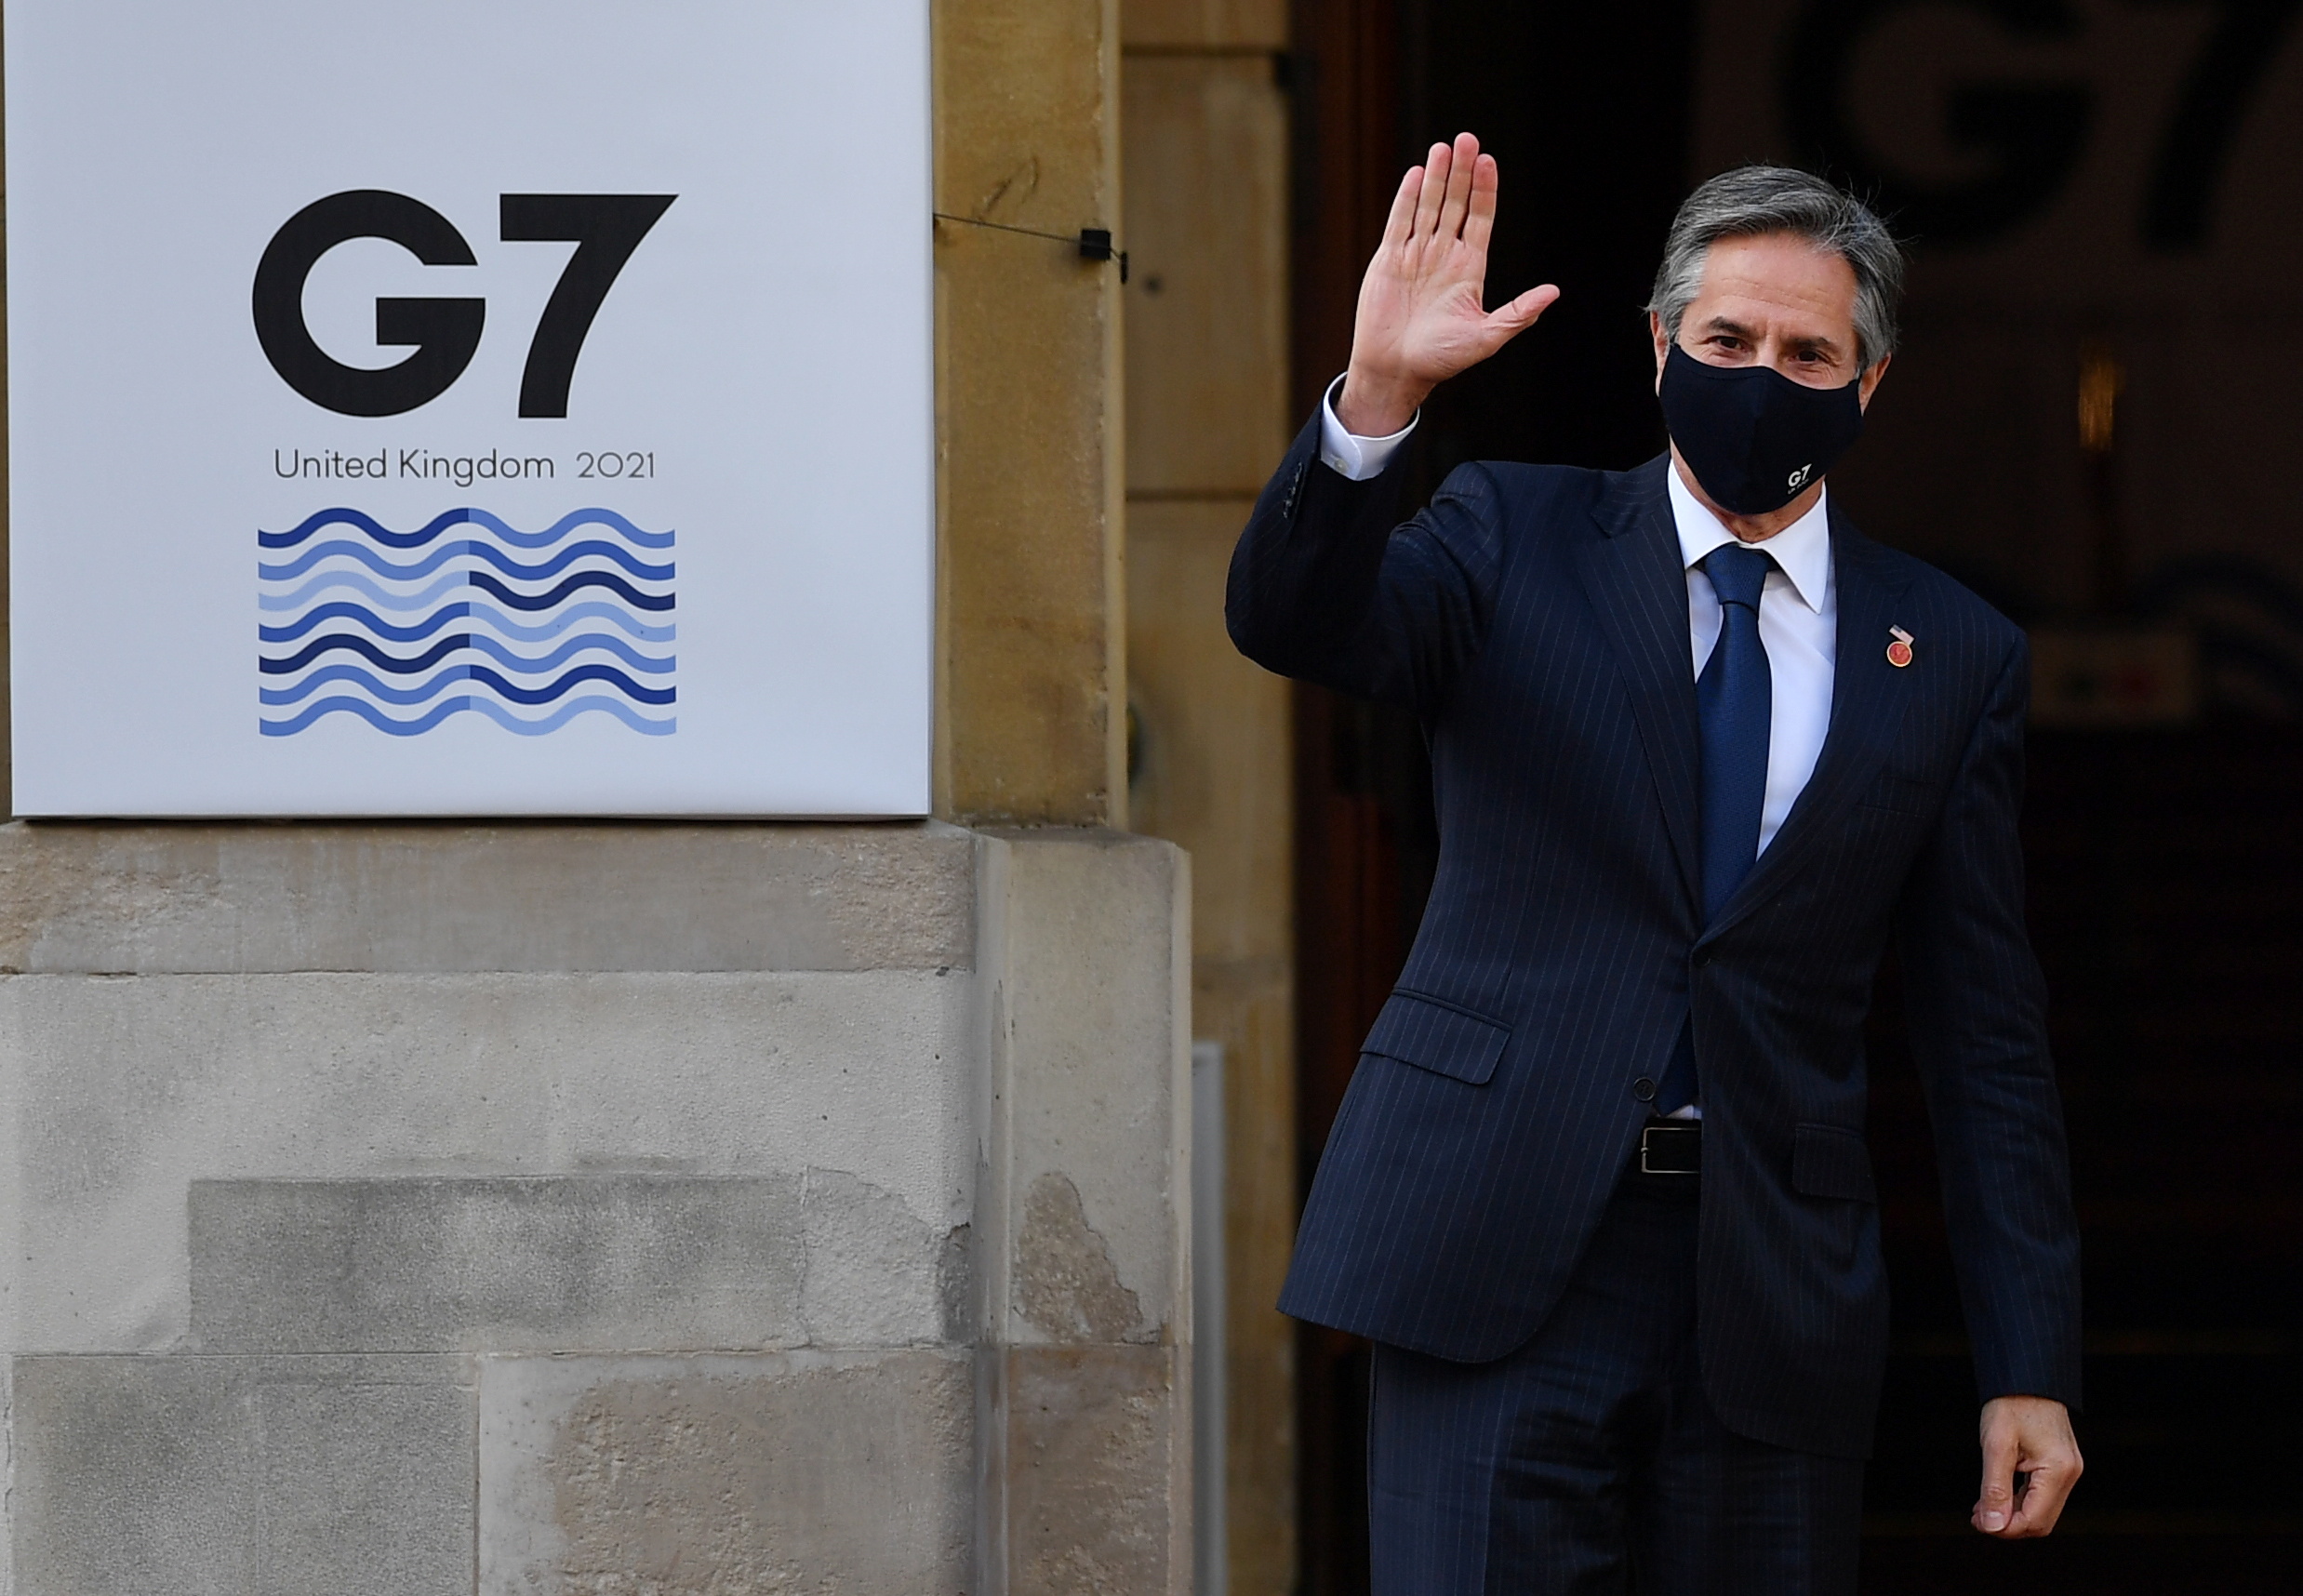 U.S. Secretary of State Antony Blinken arrives at the G7 foreign ministers meeting in London, Britain May 5, 2021. Ben Stansall/Pool via REUTERS